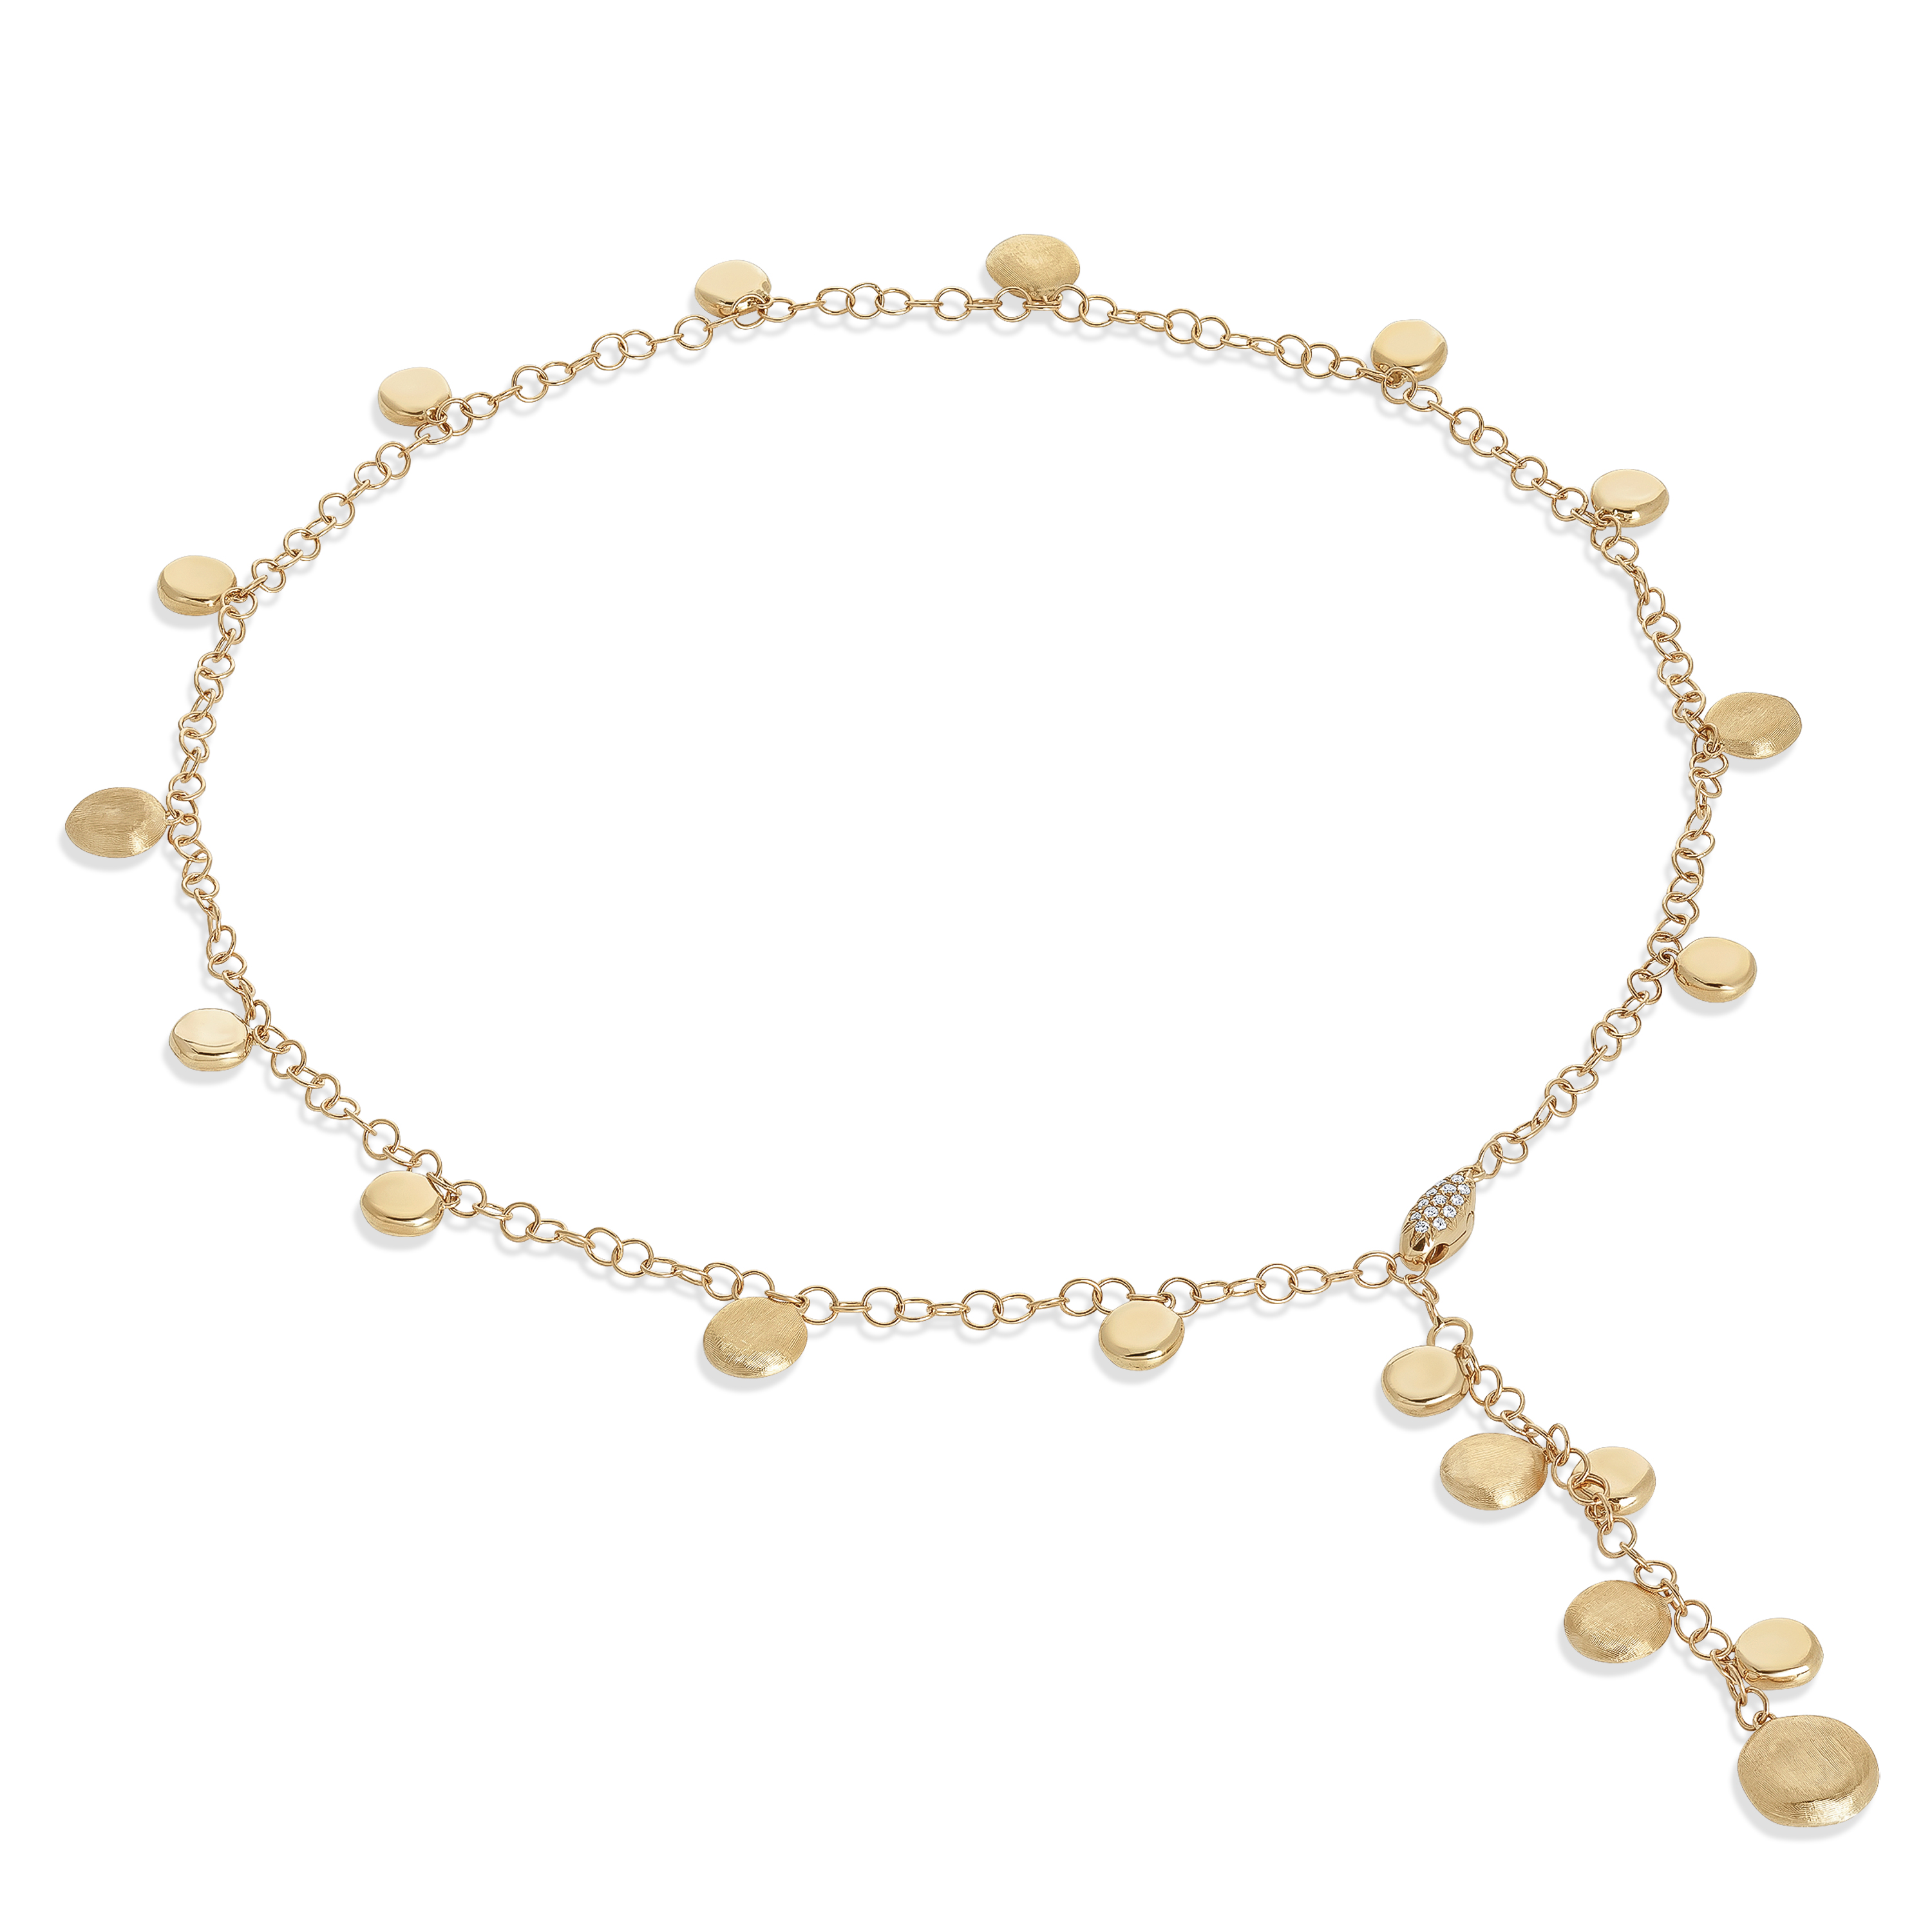 Marco Bicego 18k Yellow Gold Jaipur Collection Necklace